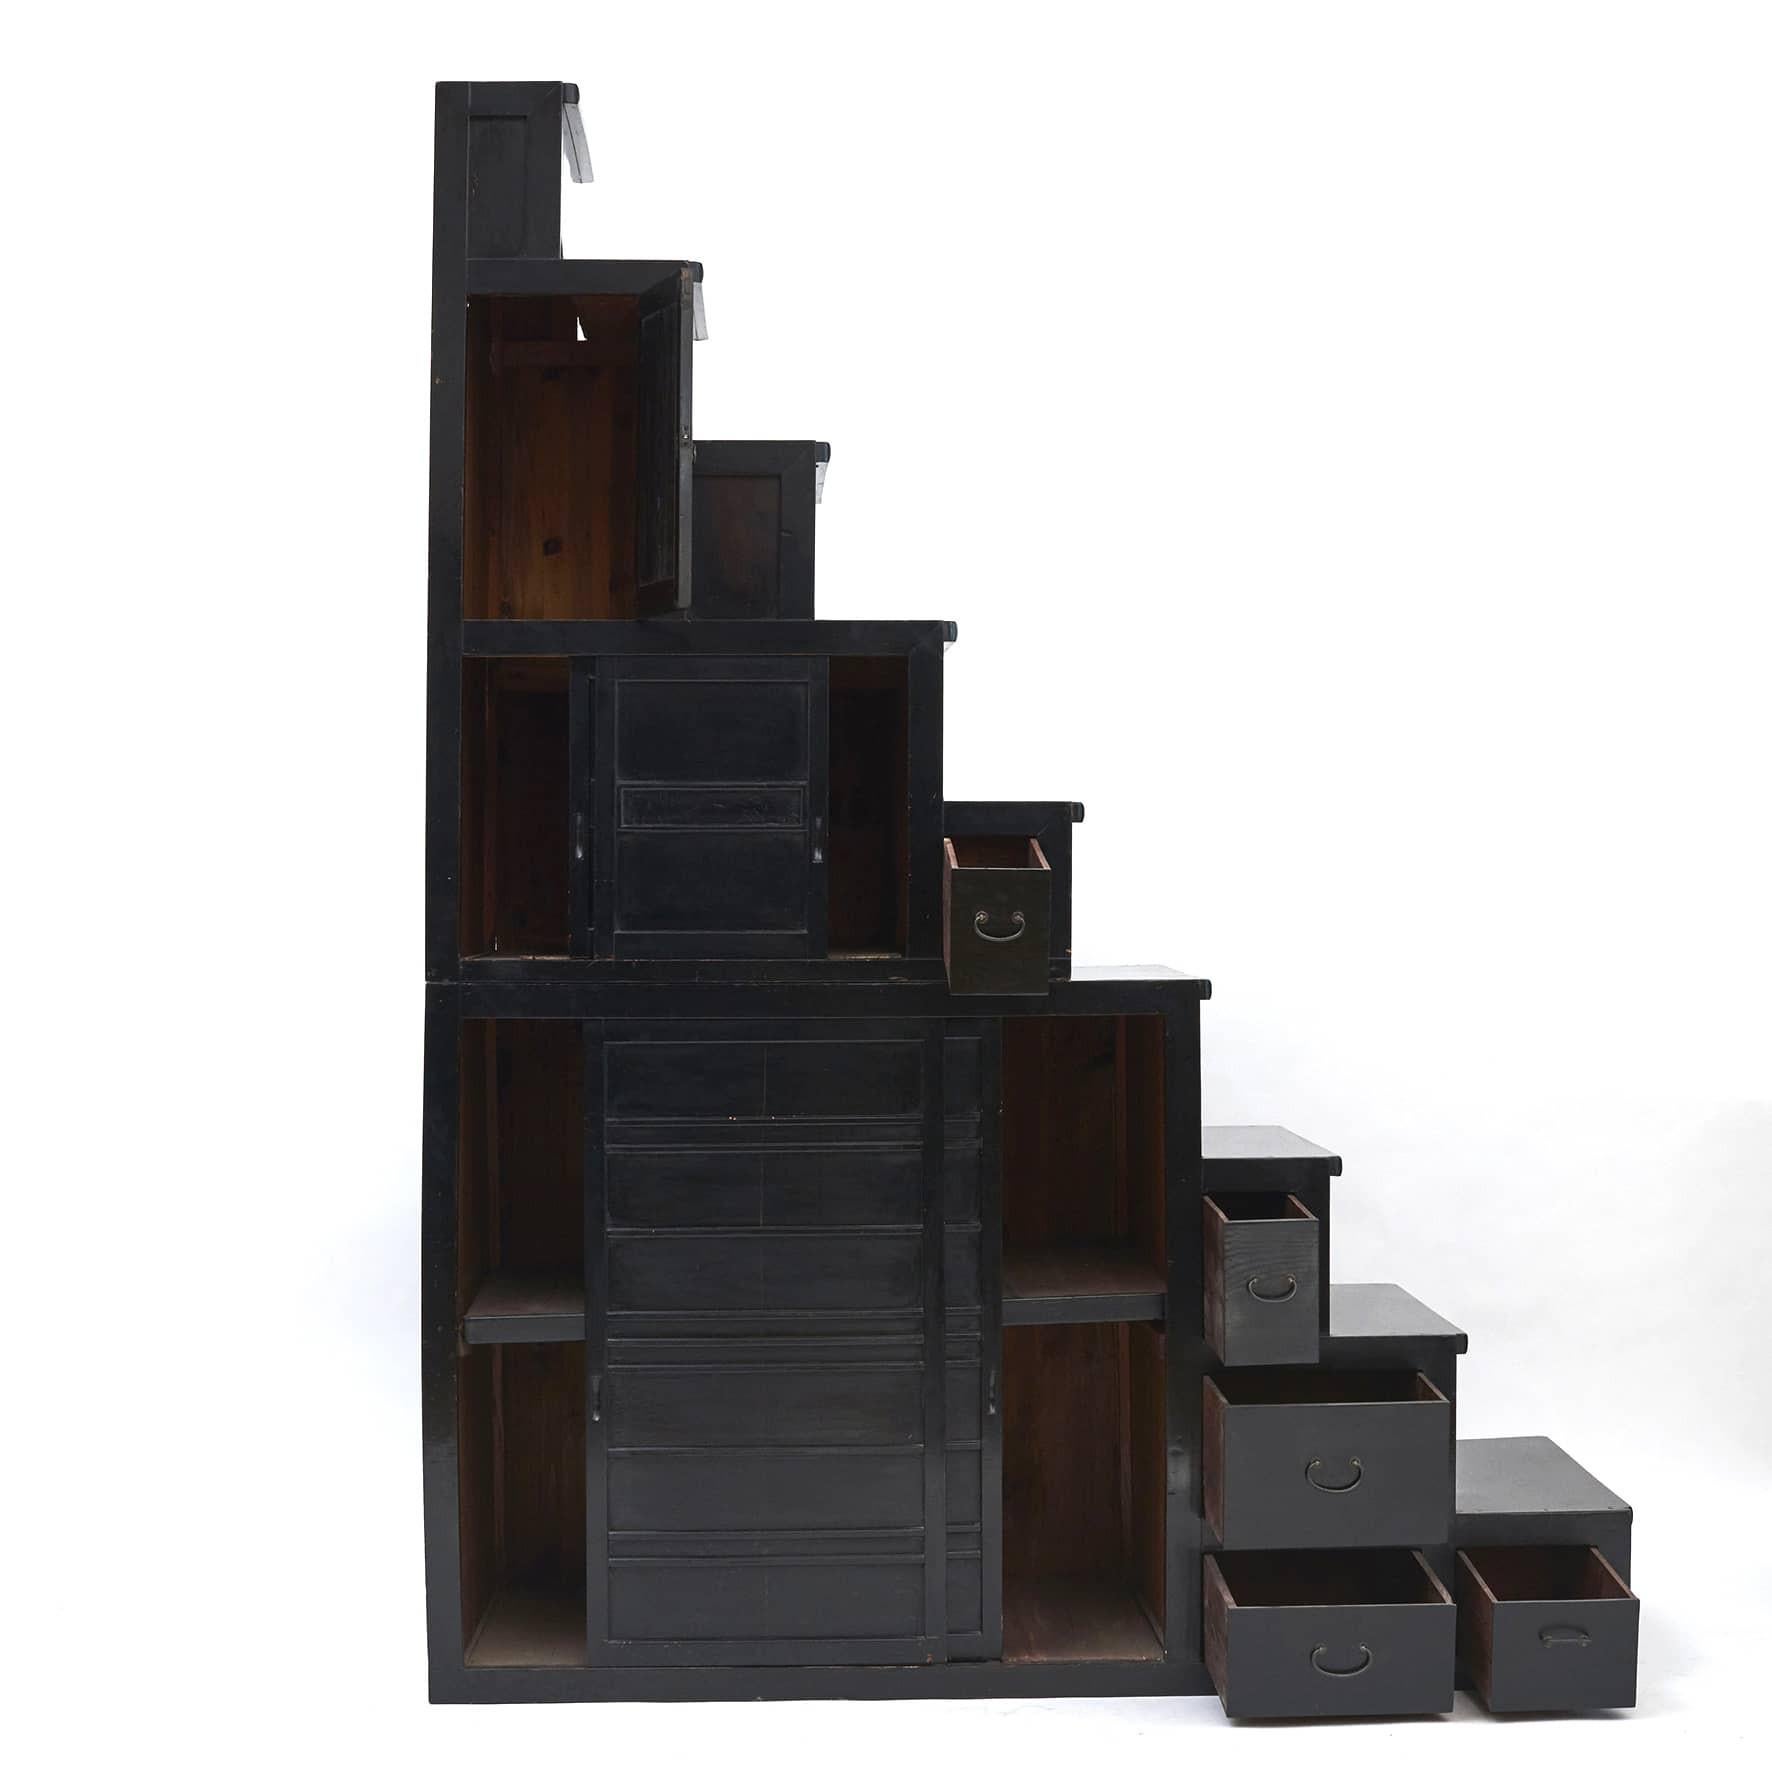 A Japanese staircase Tansu cabinet from the Meiji period.
Crafted from pine and elm wood with black lacquer.

This very large staircase Tansu is in two parts ( 104 cm + 128 cm) and features convenient stepped storage capacity with sliding doors